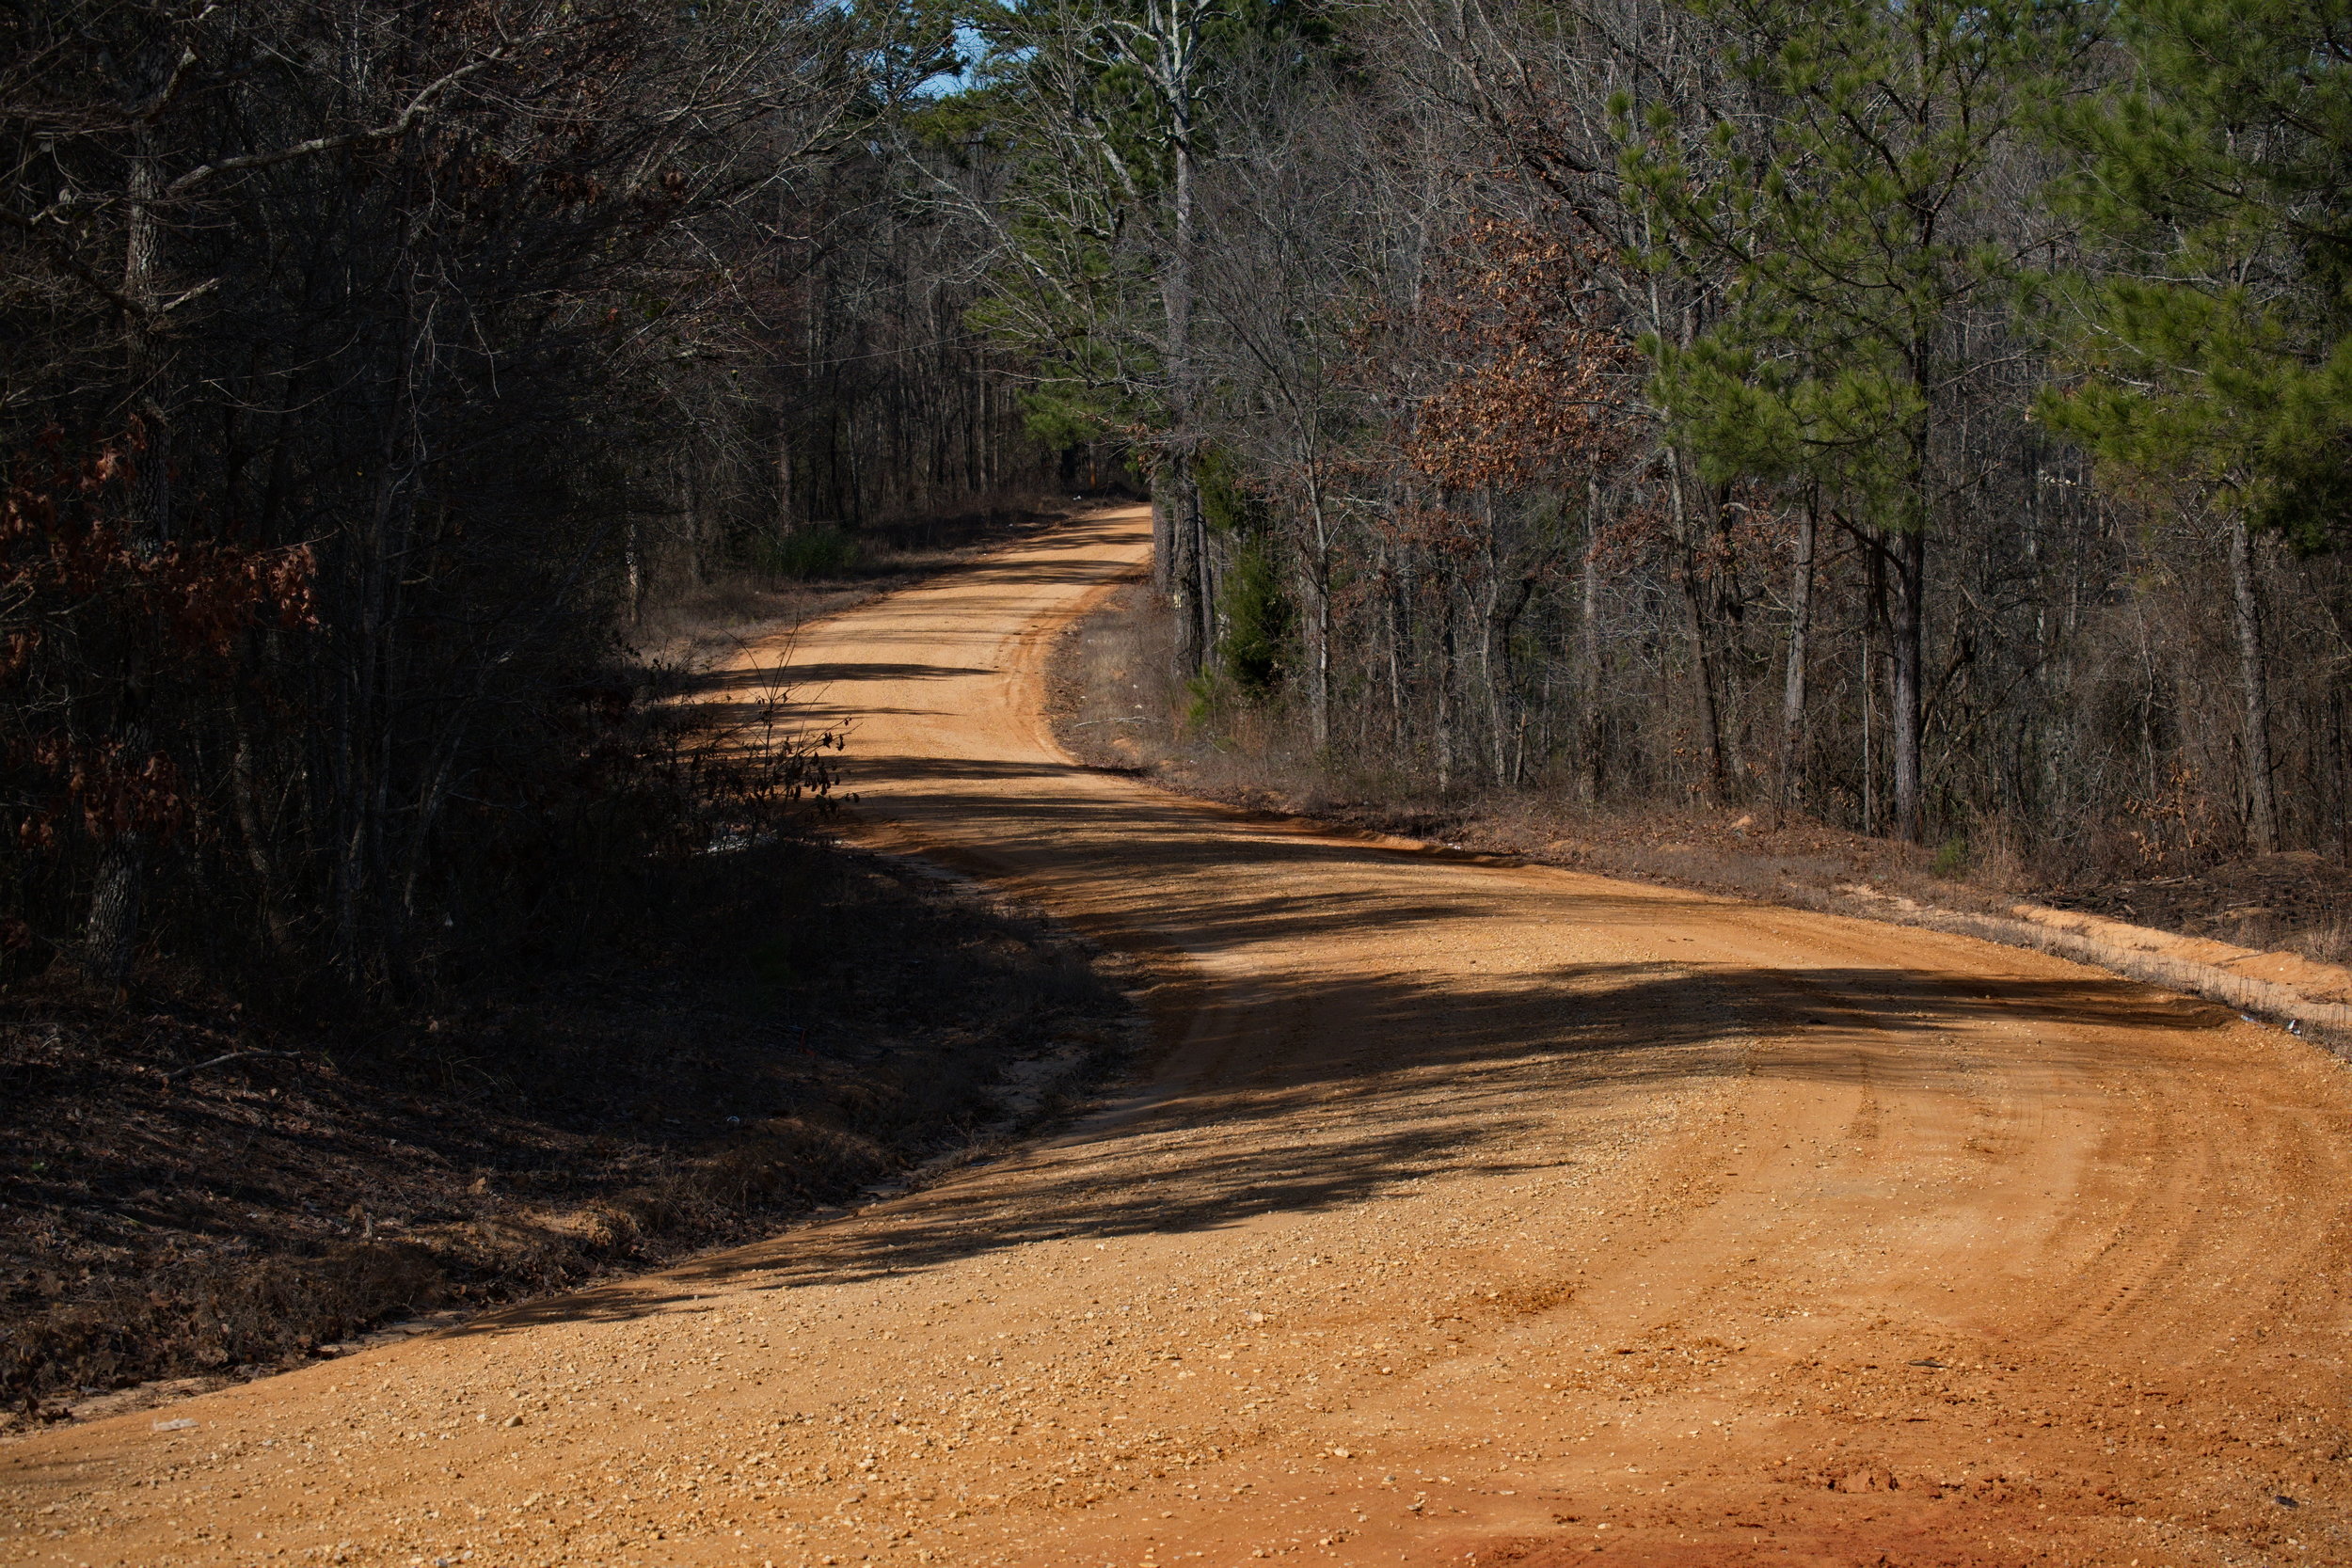  There's just something about a winding gravel road 